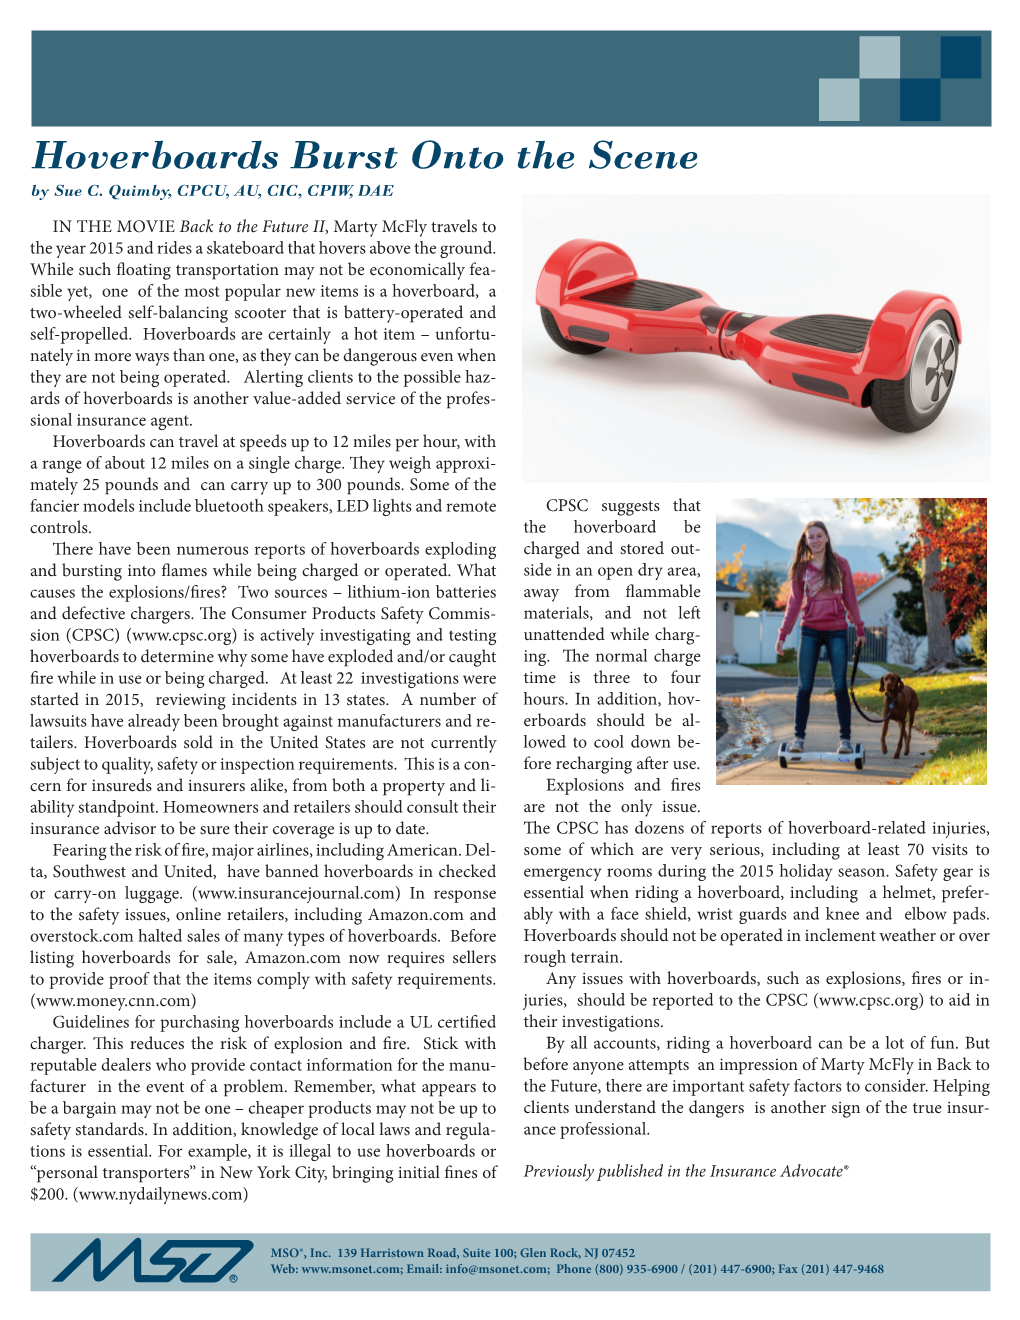 Hoverboards Burst Onto the Scene by Sue C